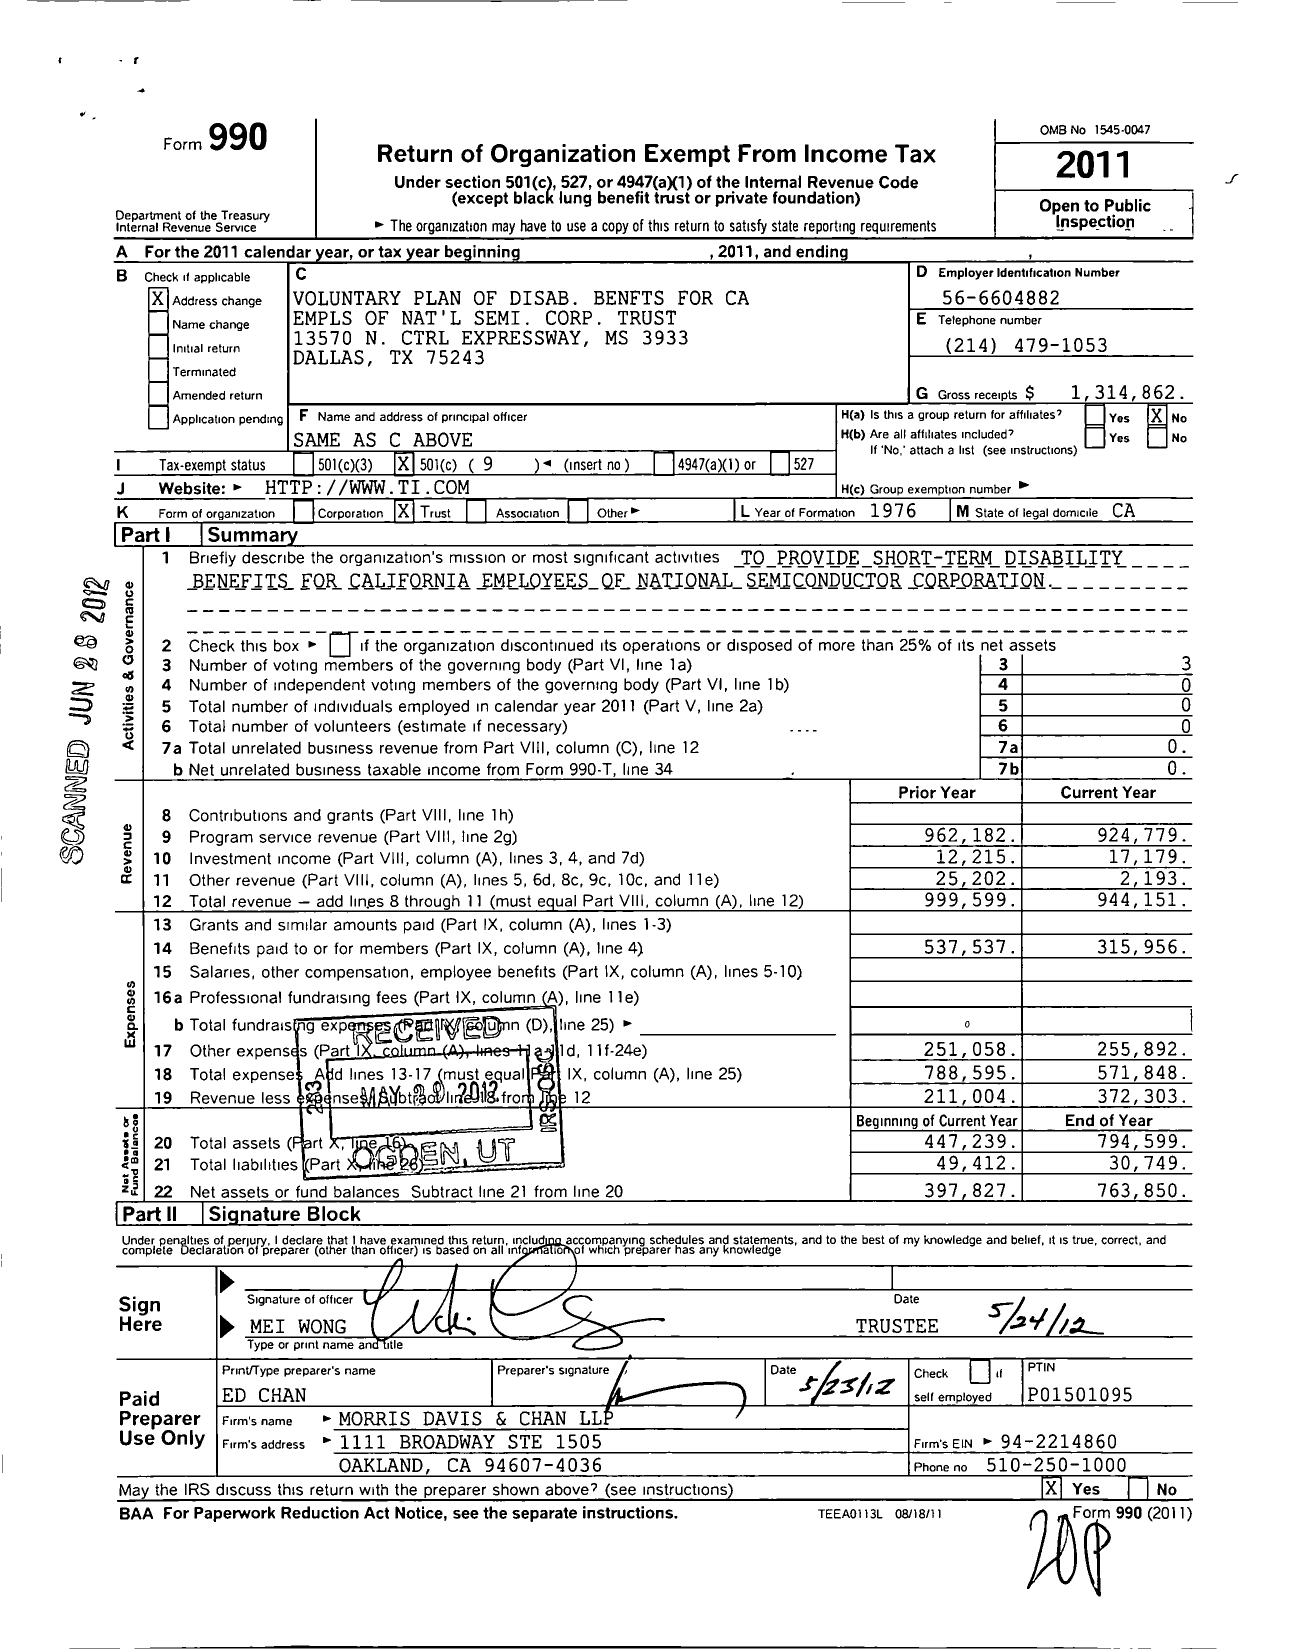 Image of first page of 2011 Form 990O for Voluntary Plan of Disab Benfts for Ca Empls of National Semi Corp Trust